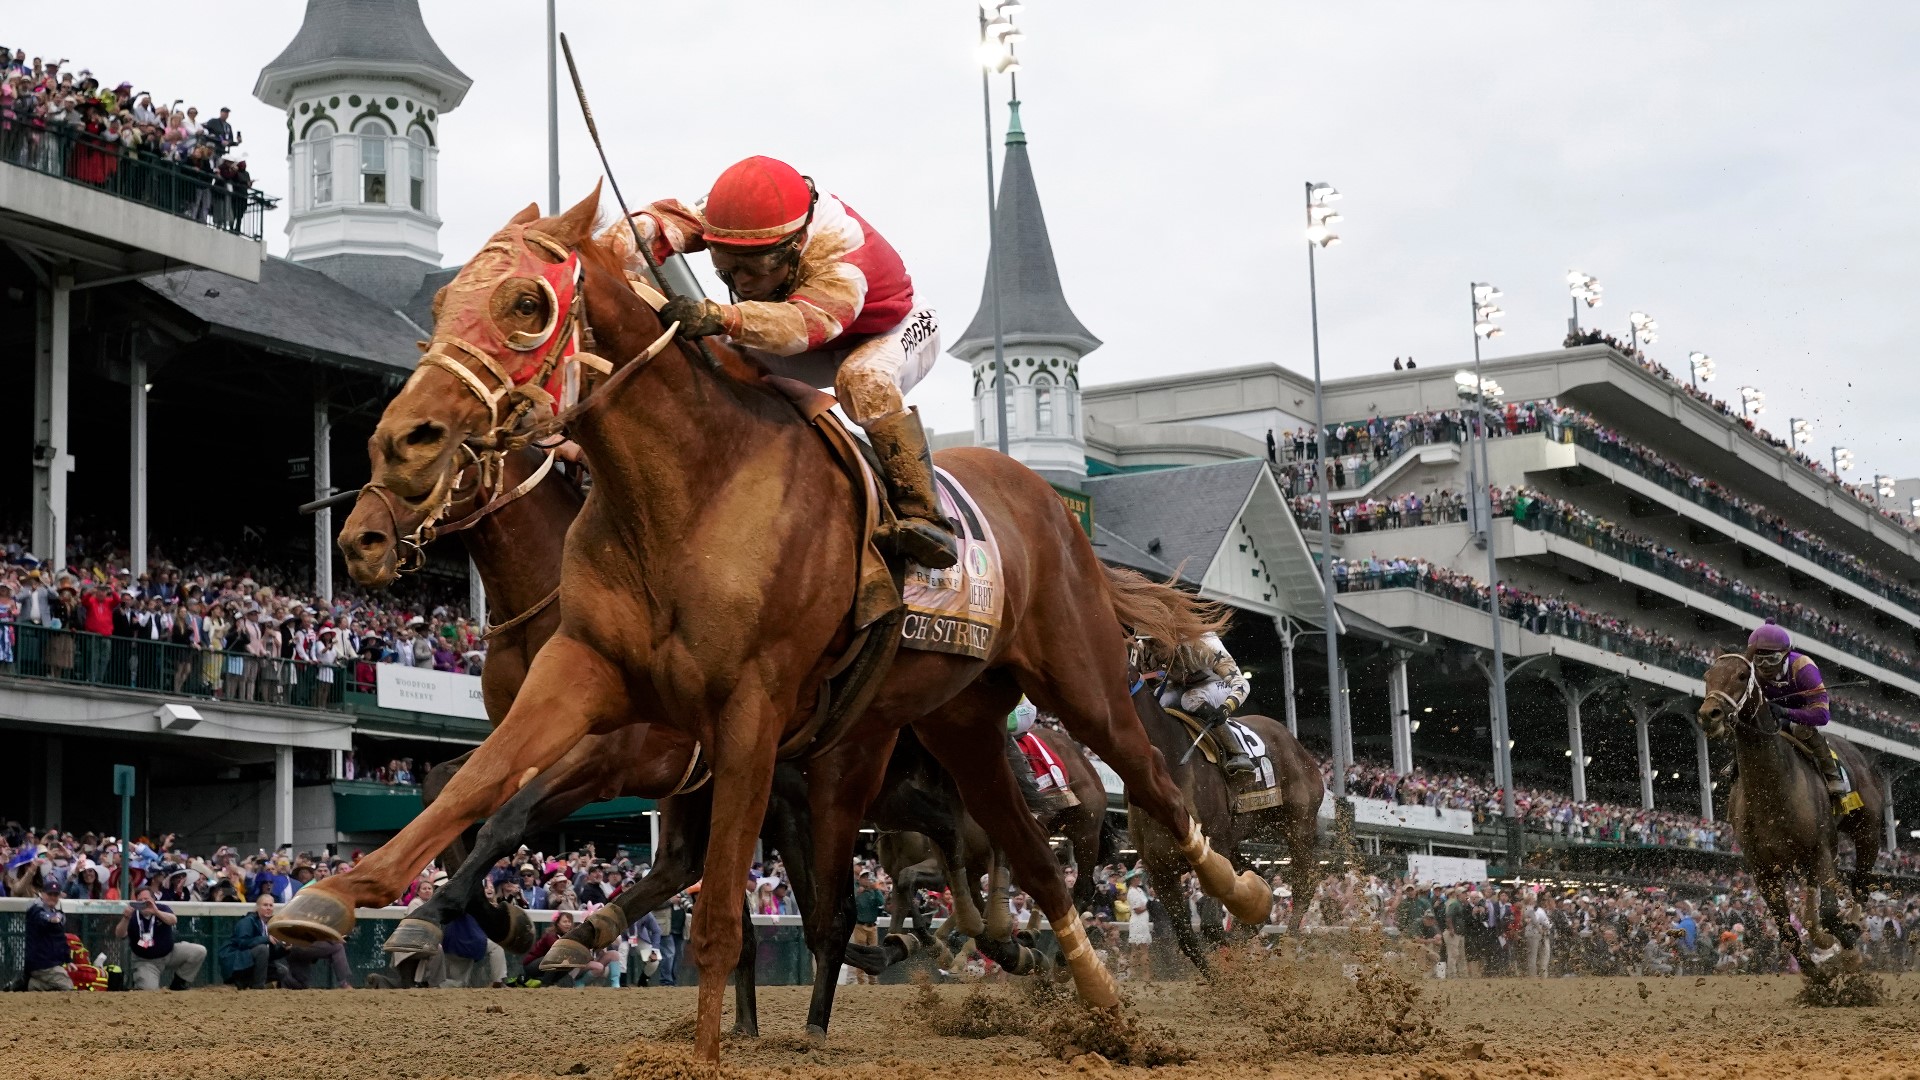 What time does the Kentucky Derby start?